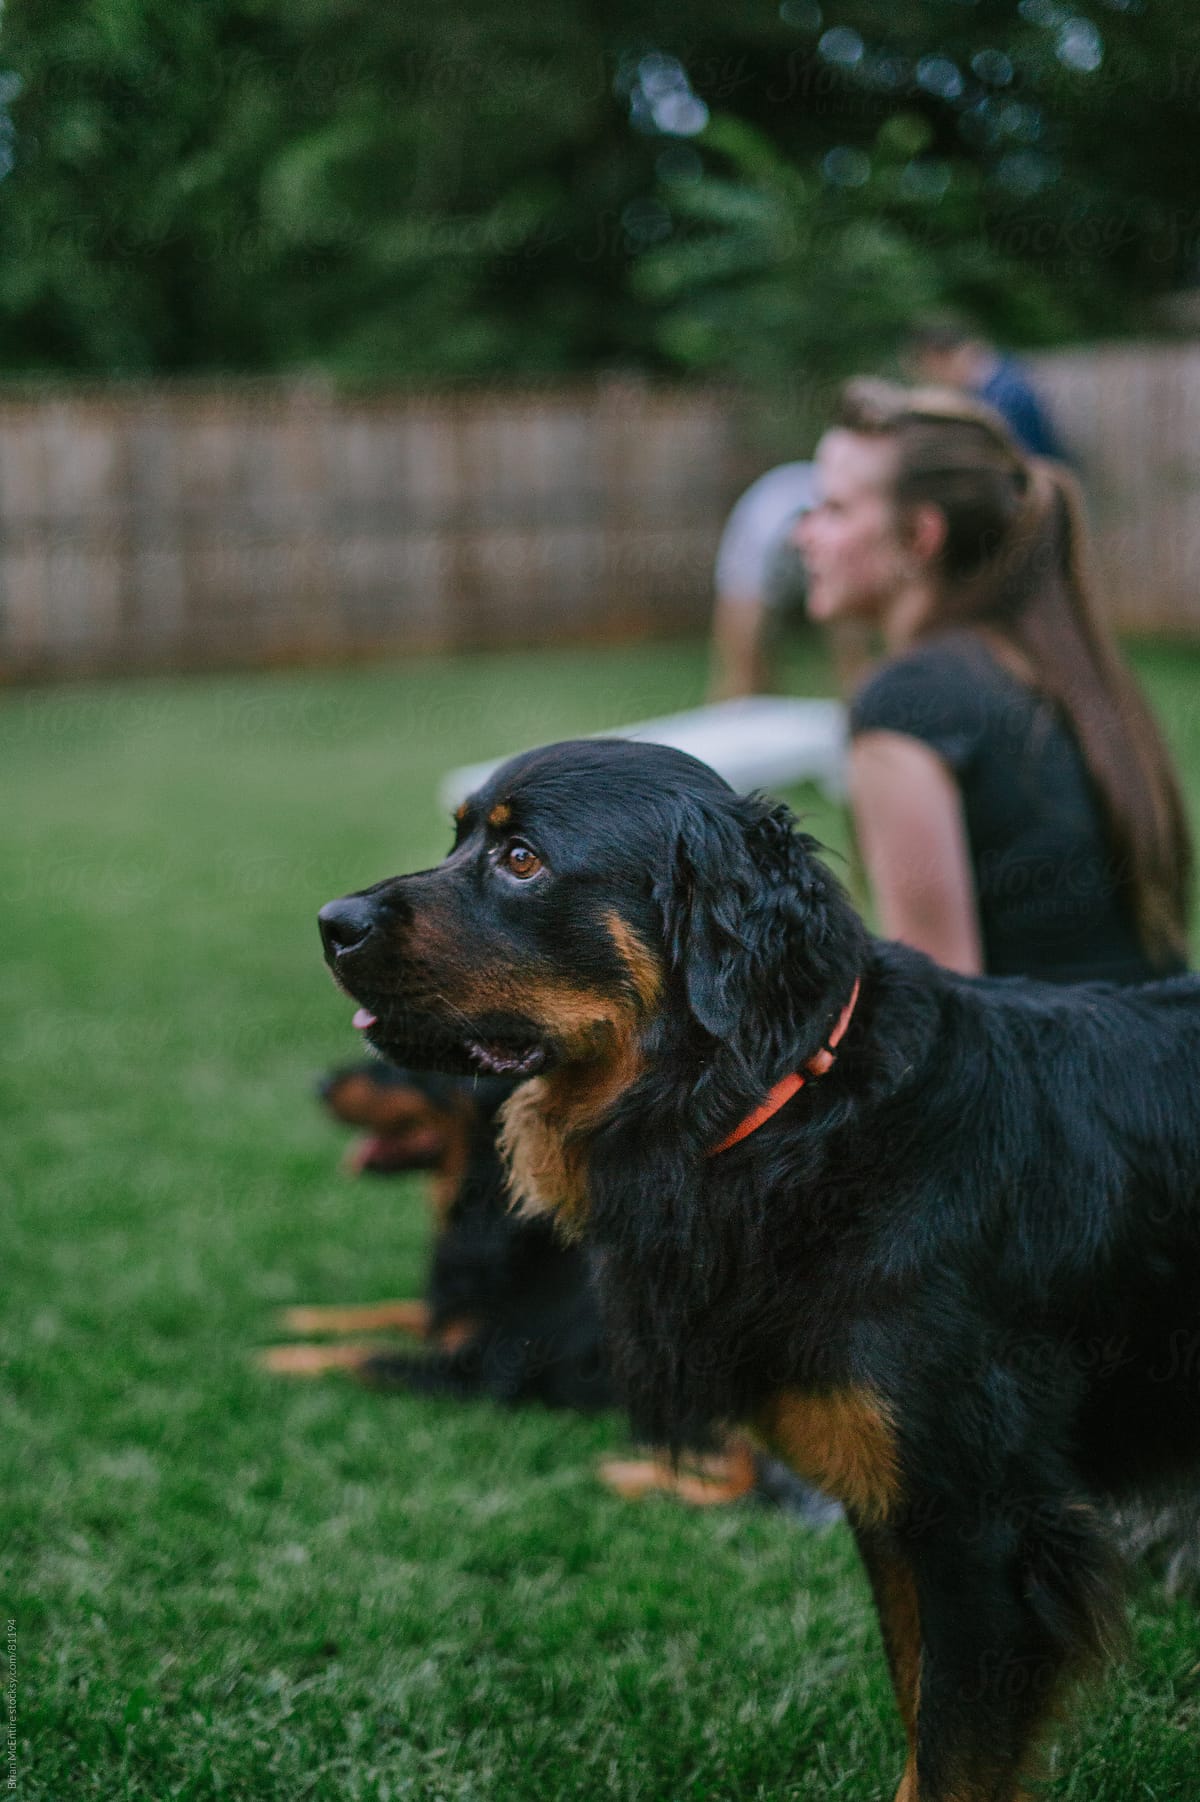 Family Pet Dog Prominently Featured Among Guests Watching Game At Backyard Party